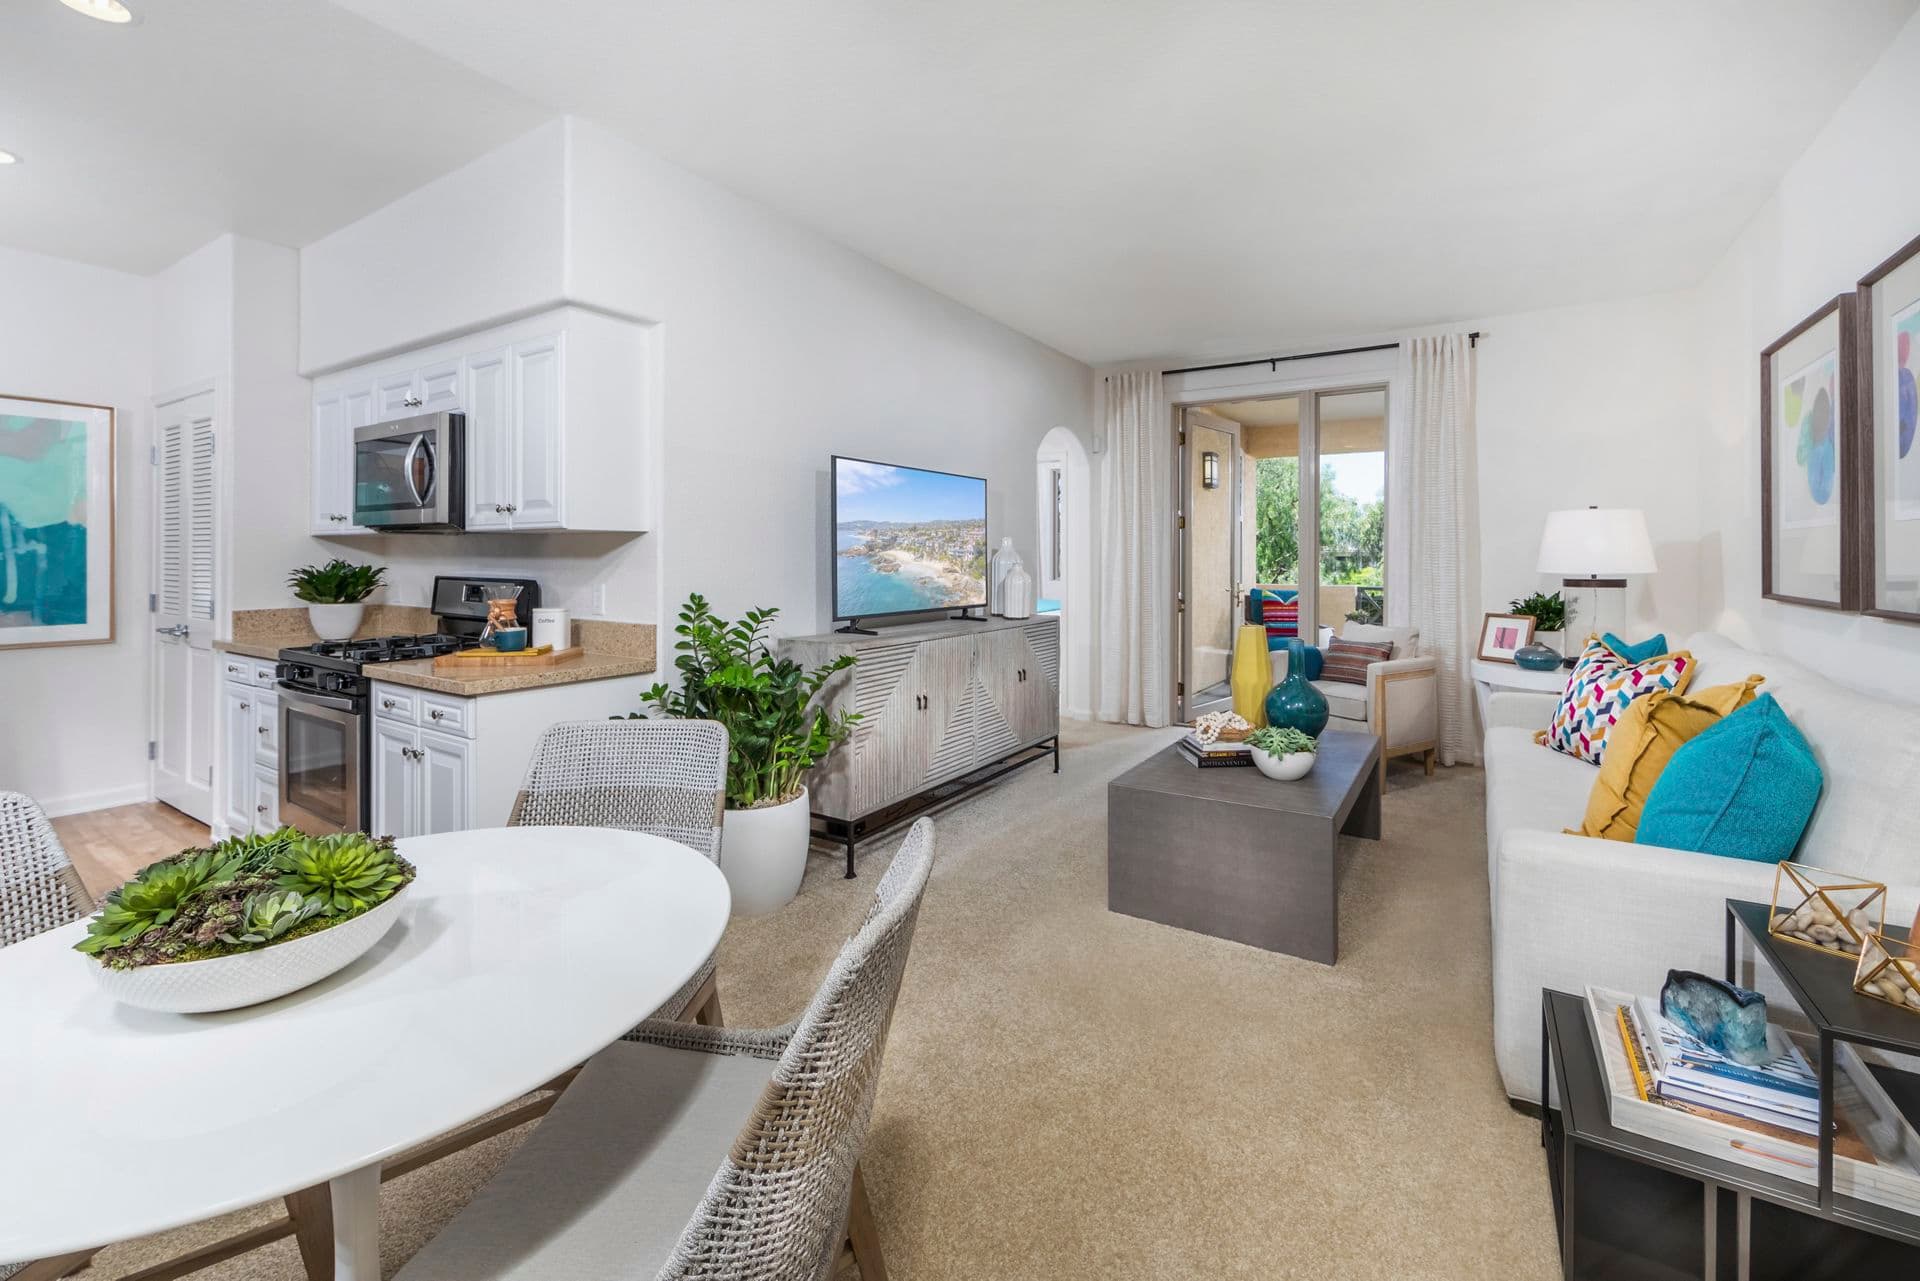 Interior view of living room and dining room at Pacific View Apartment Homes in Carlsbad, CA.